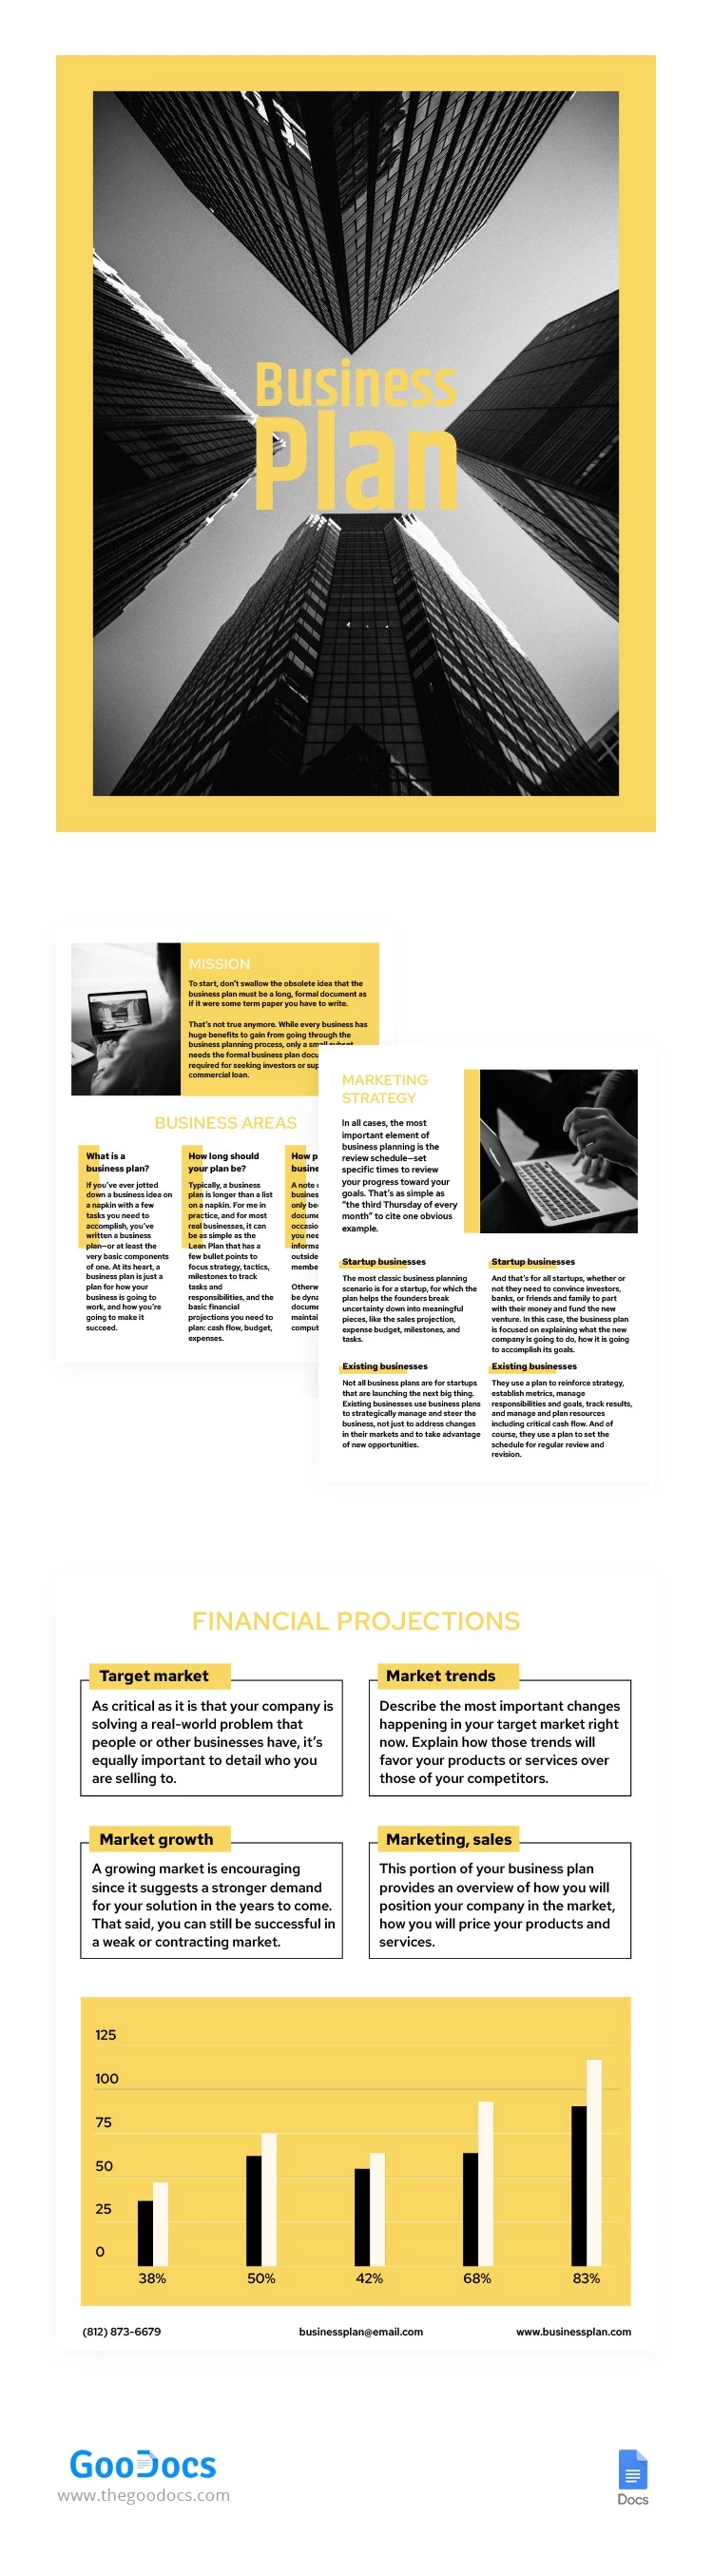 Piano di business Yellow Accent - free Google Docs Template - 10063461